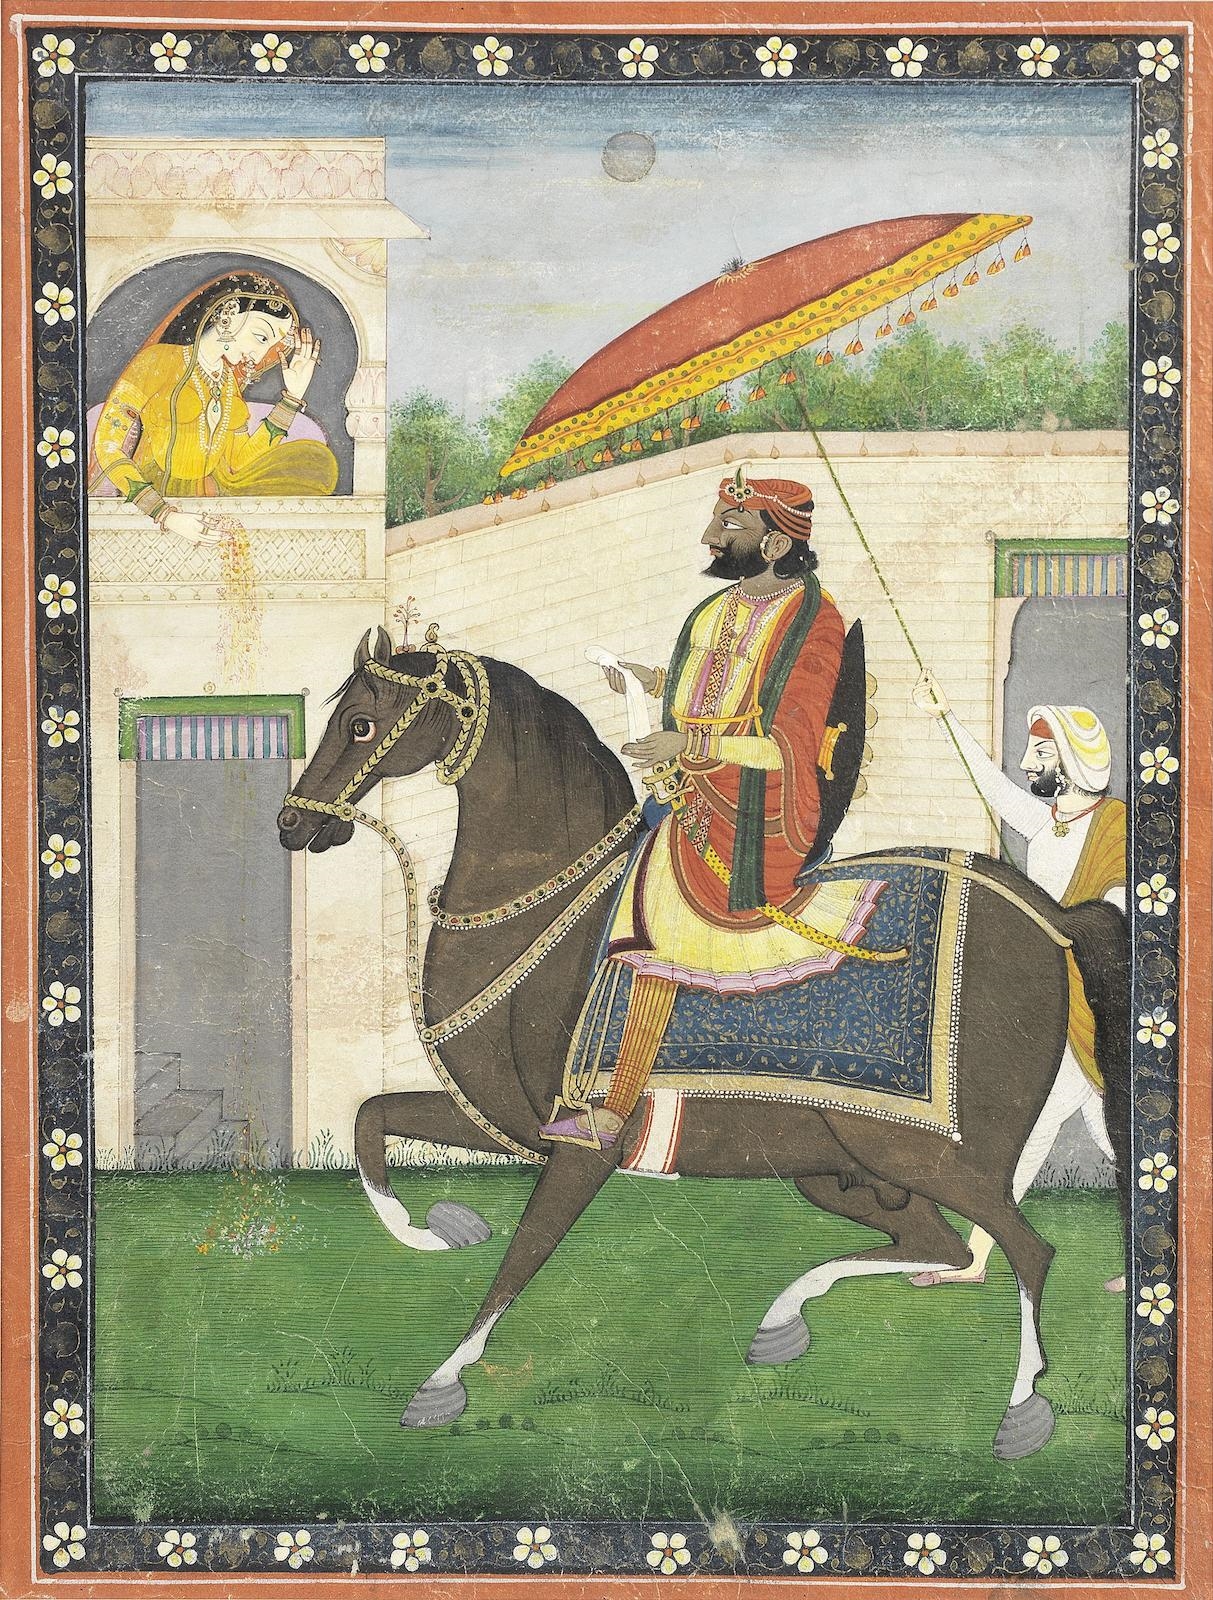 Maharajah Ghulab Singh on horseback, accompanied by an attendant, paying court to a maiden on a balcony above him by Punjab School, 19th Century, circa 1840-1845